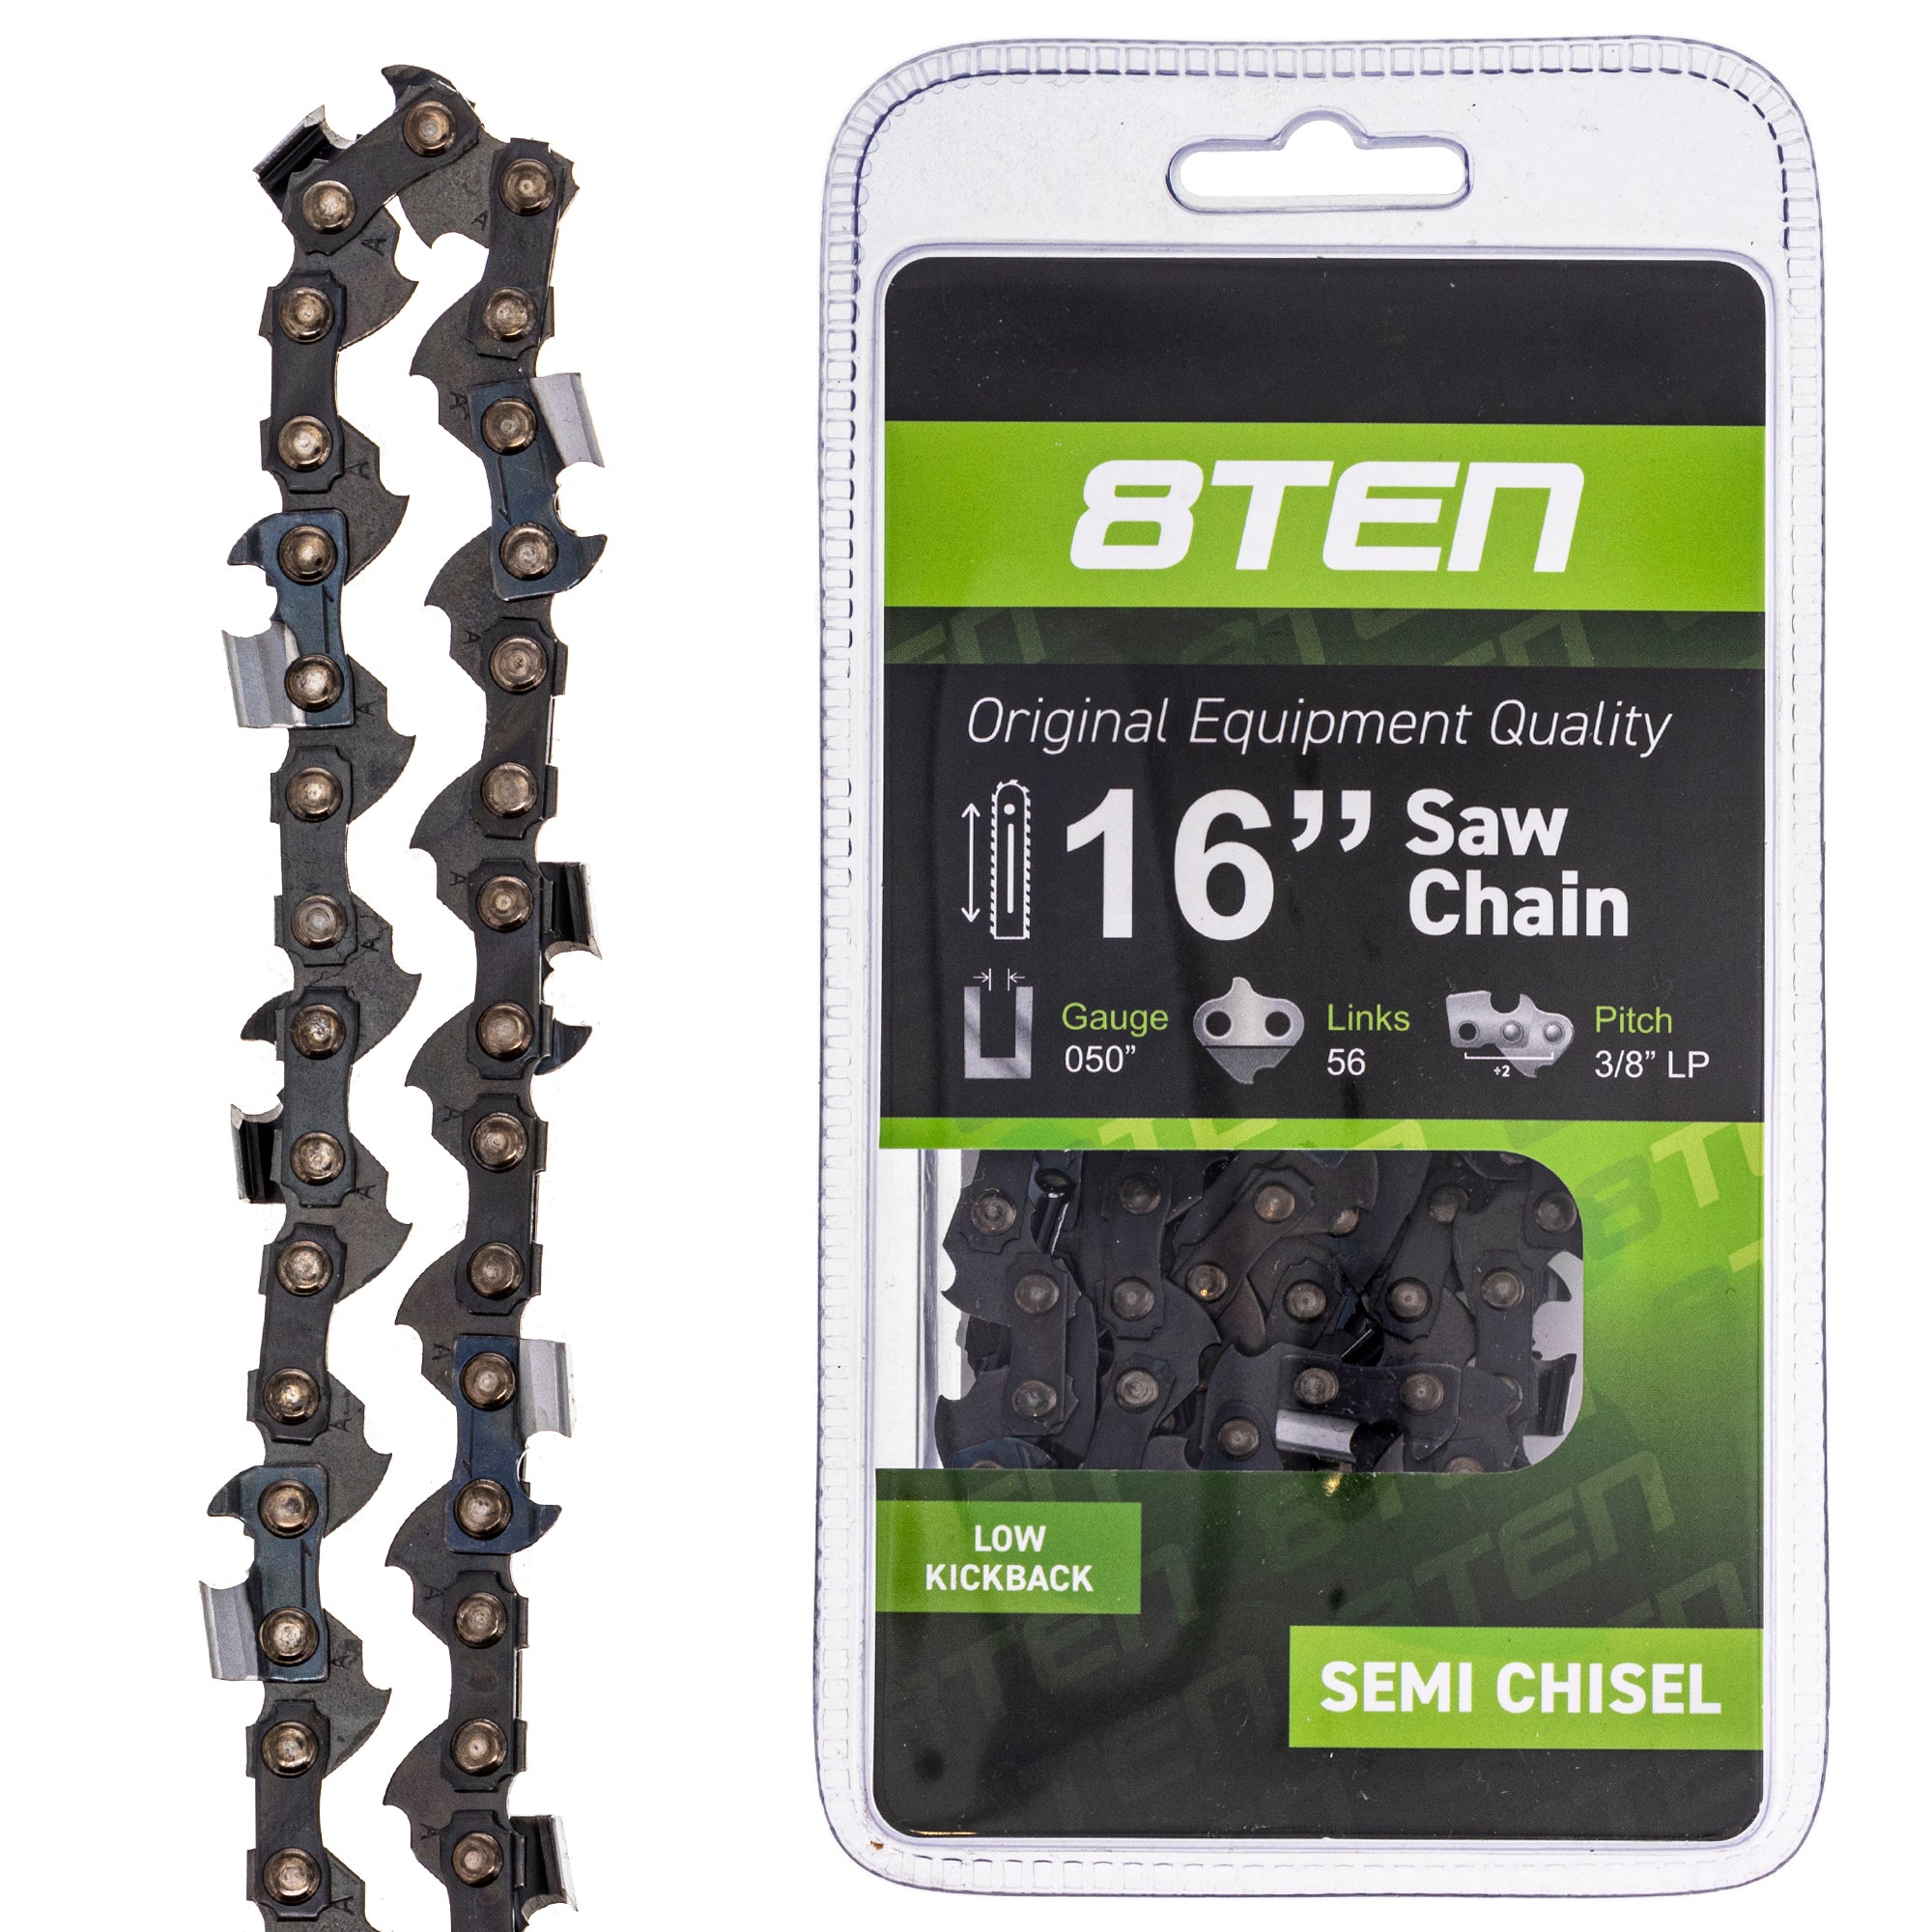 Chainsaw Chain 16 Inch .050 3/8 56DL for zOTHER Windsor Stens Oregon Ref. Oregon Carlton 8TEN 810-CCC2242H